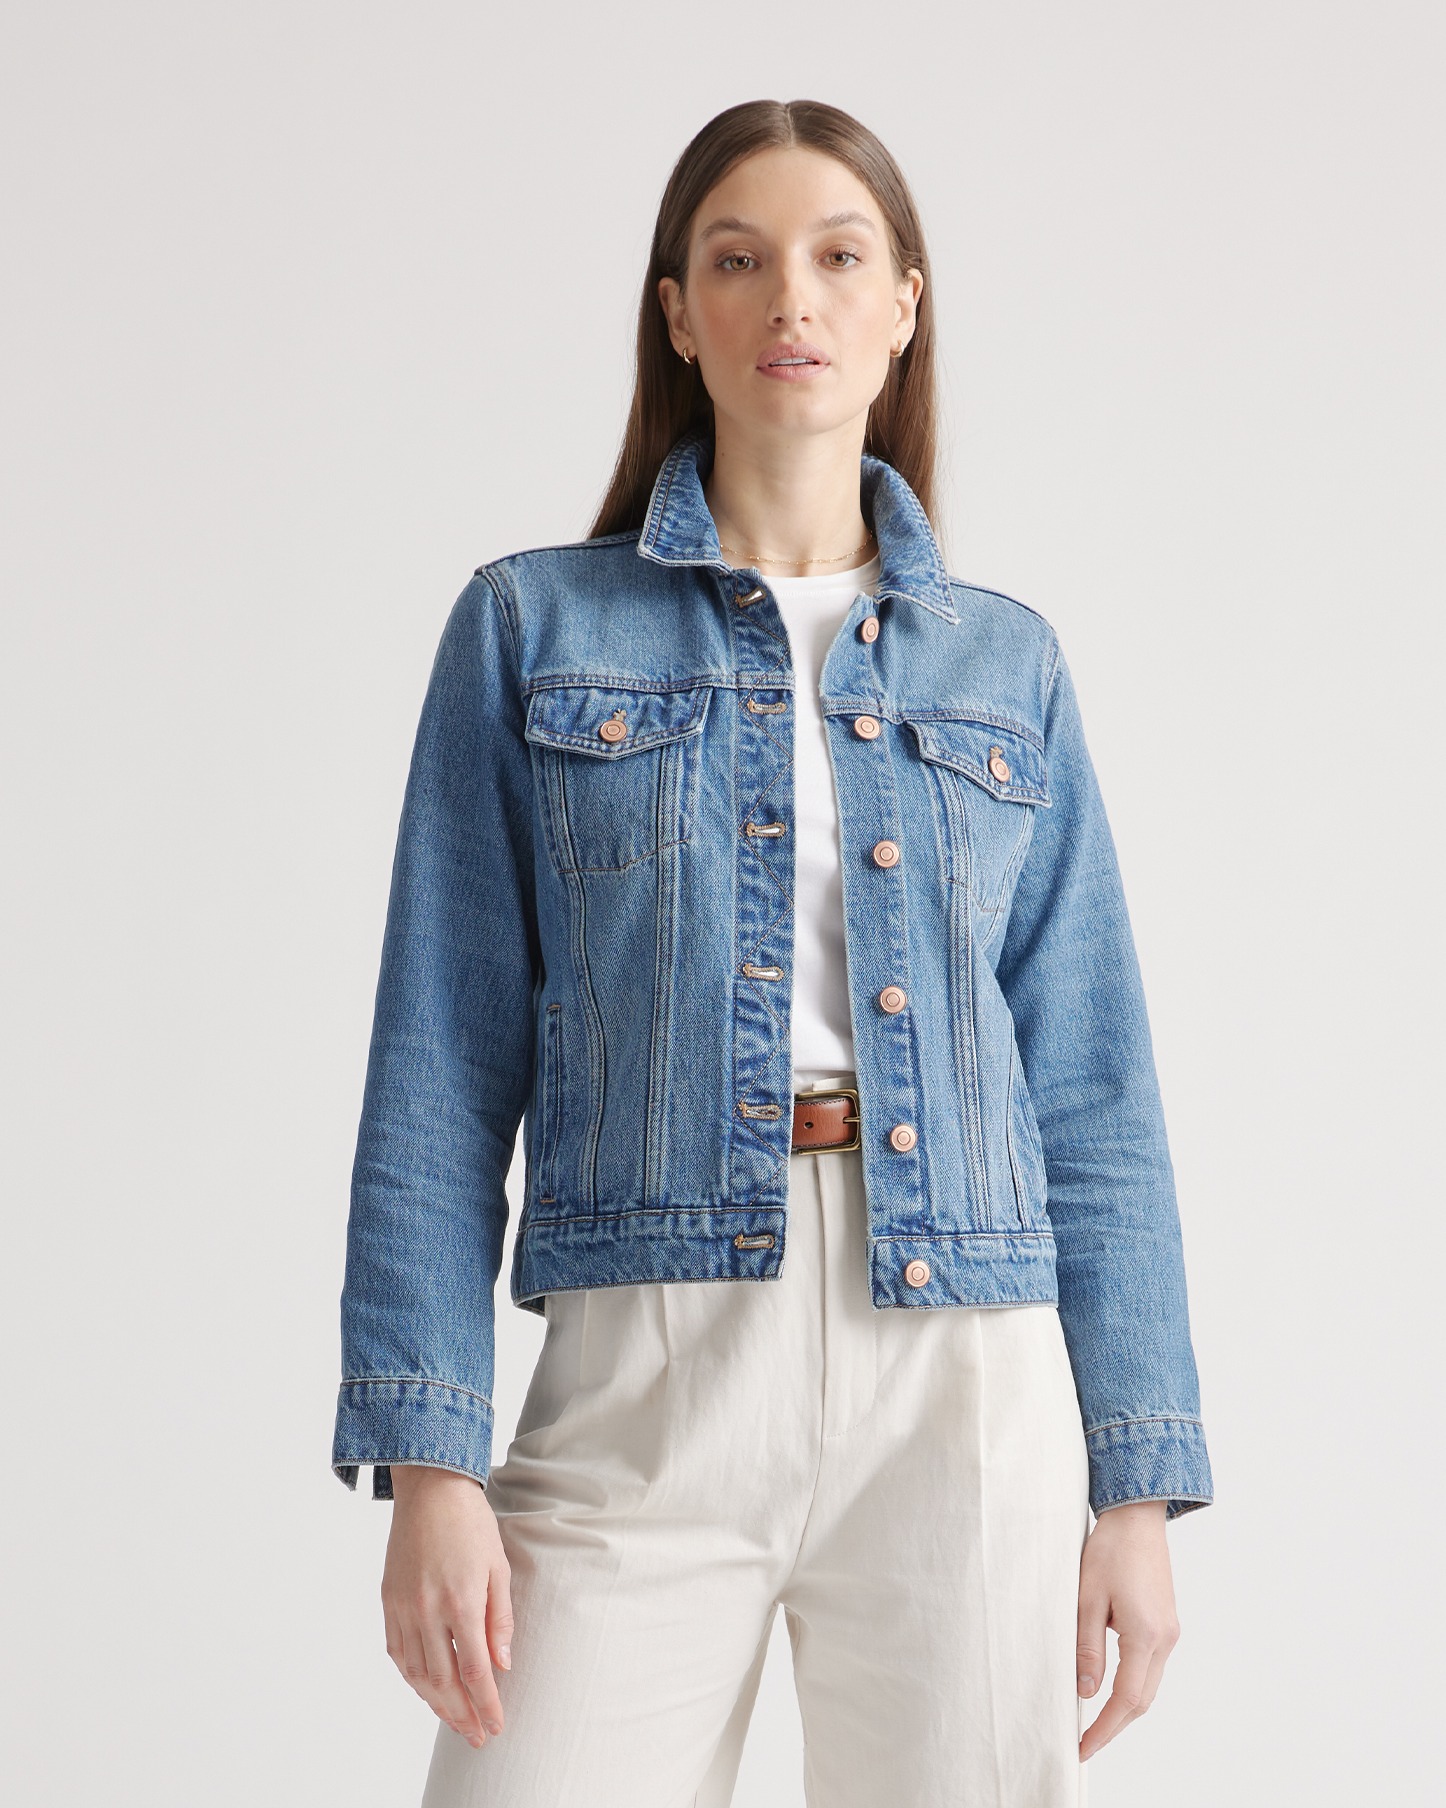 27 Cute Jean Jacket Outfit Ideas: What To Wear With Denim